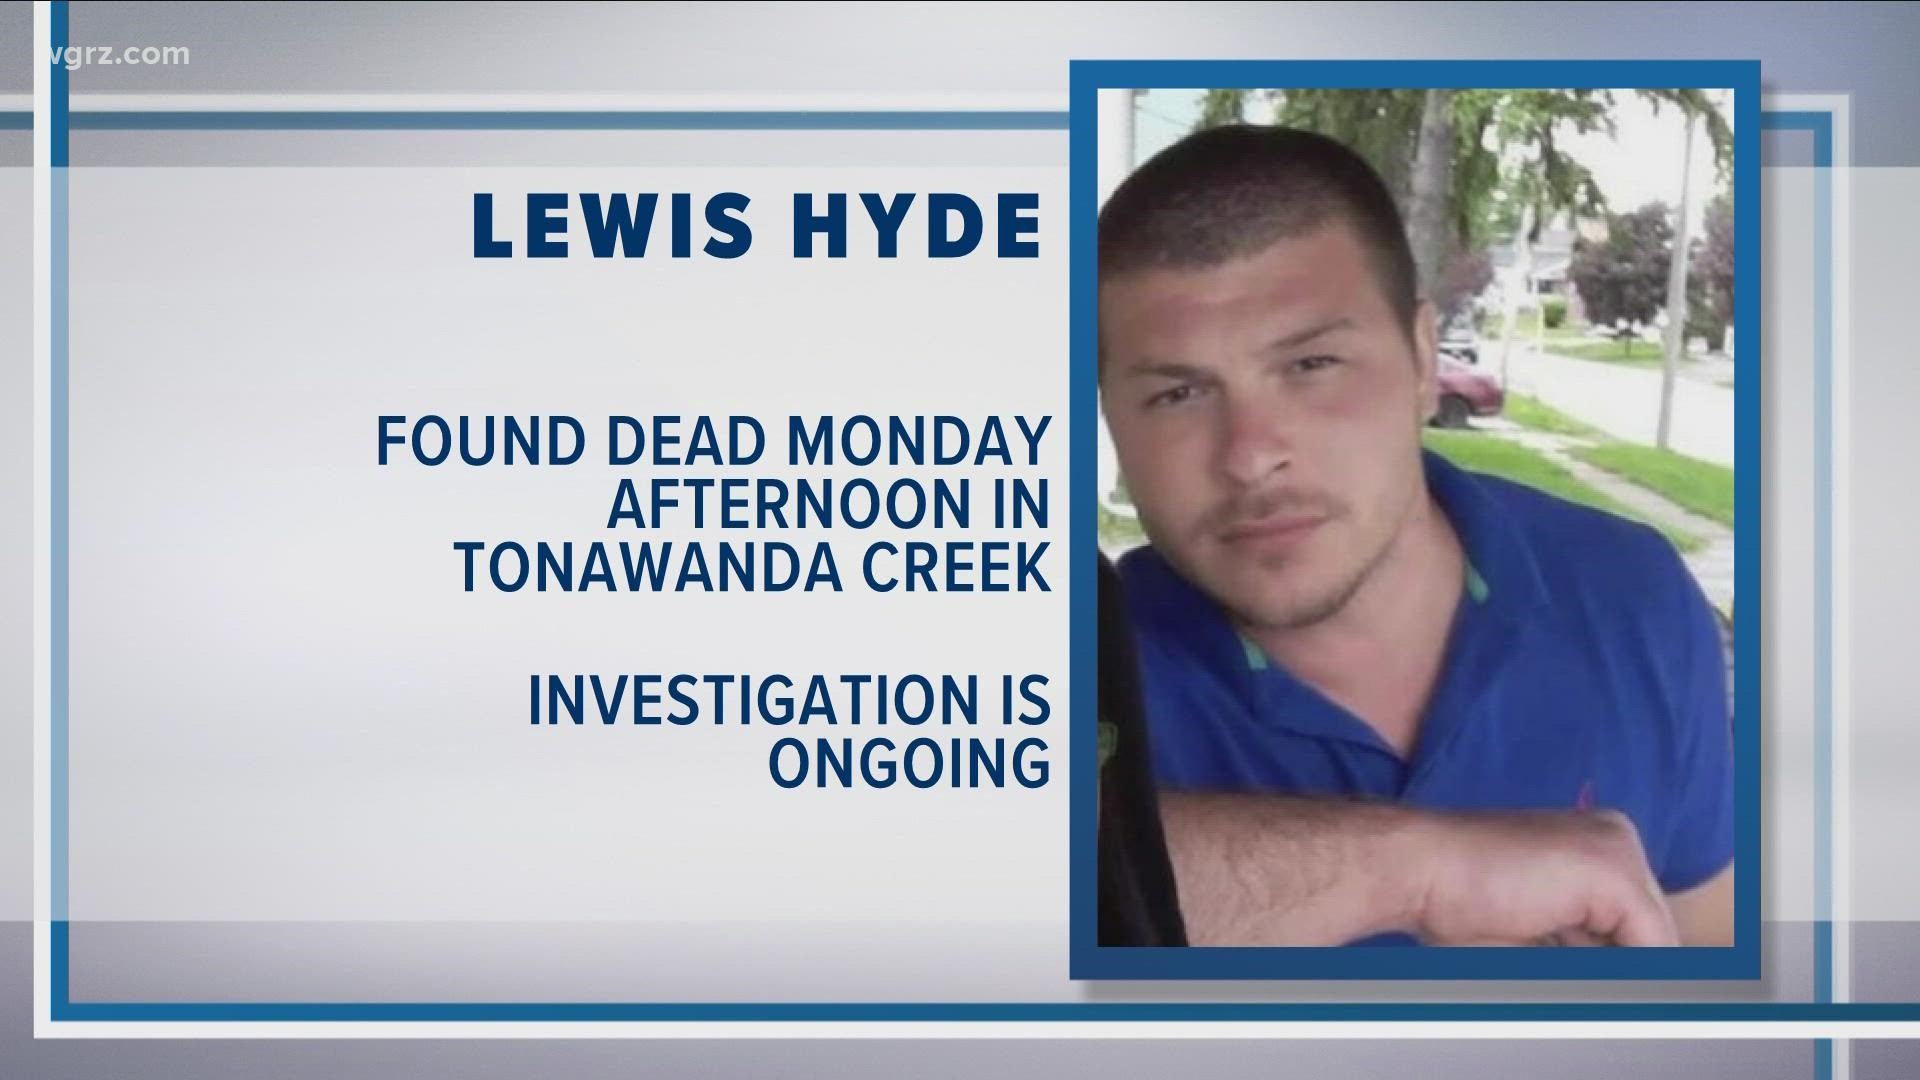 Lewis Hyde was found dead this afternoon in the Tonawanda Creek. The investigation is still ongoing.